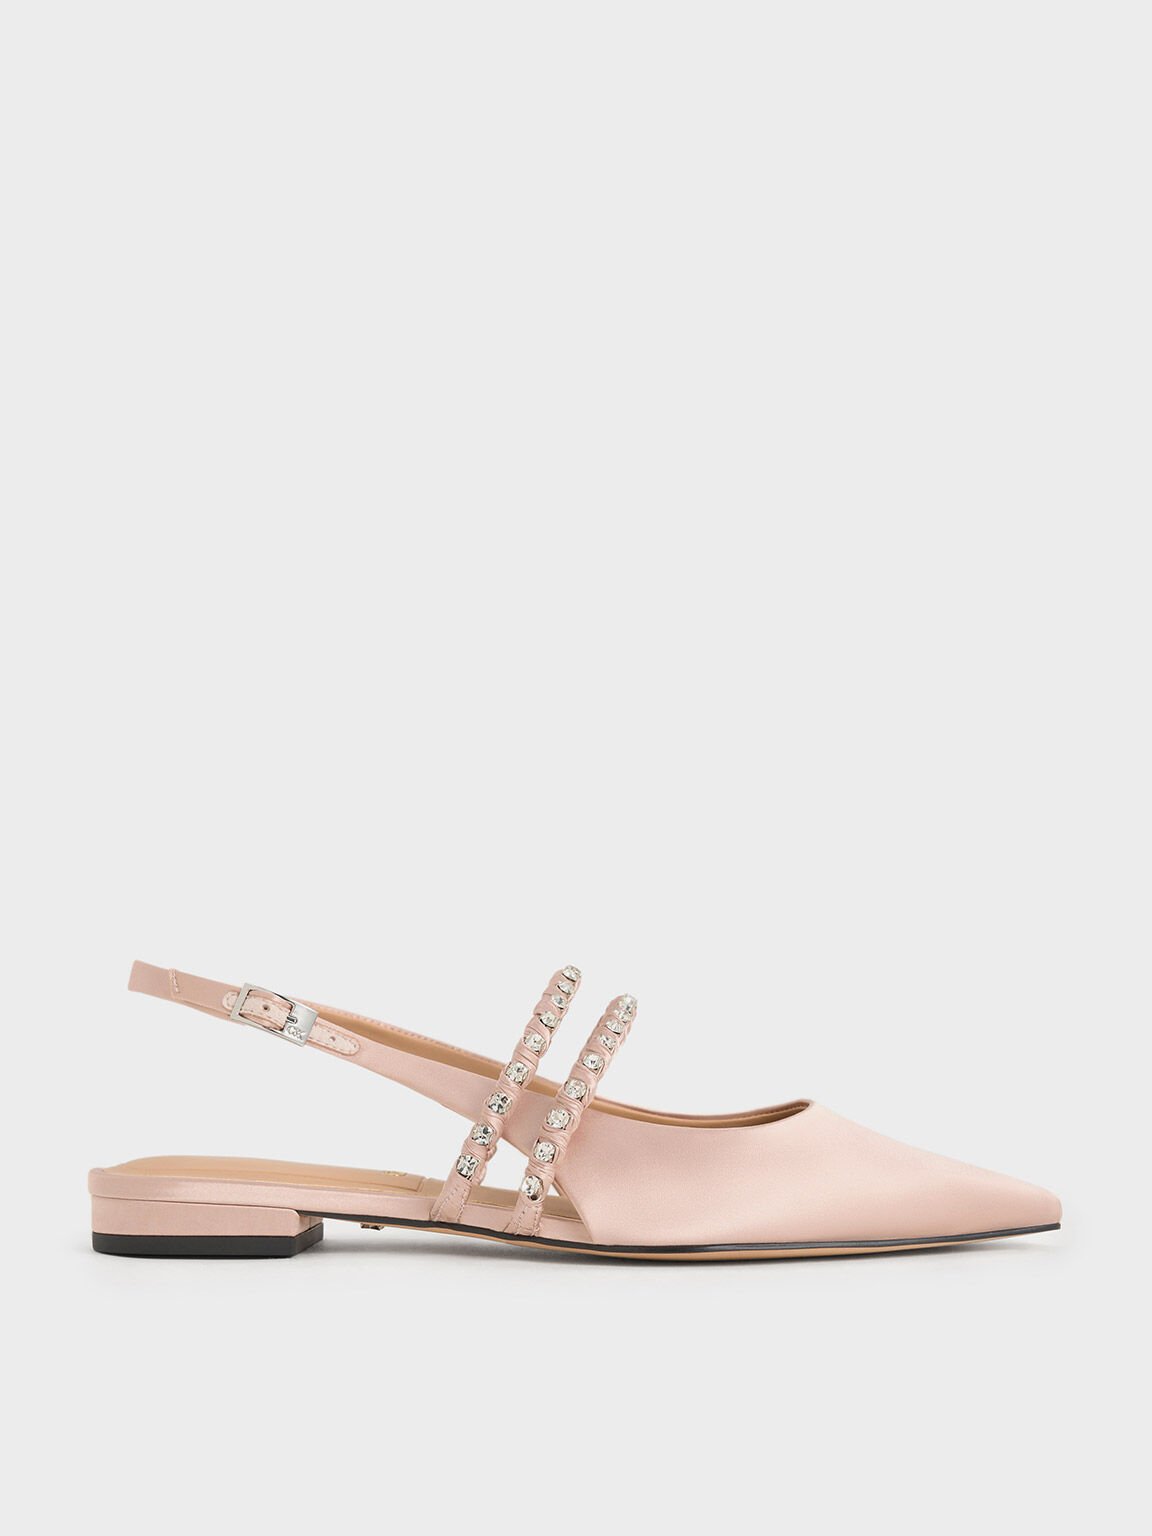 Goldie Recycled Polyester Gem-Encrusted Mary Jane Flats, Light Pink, hi-res